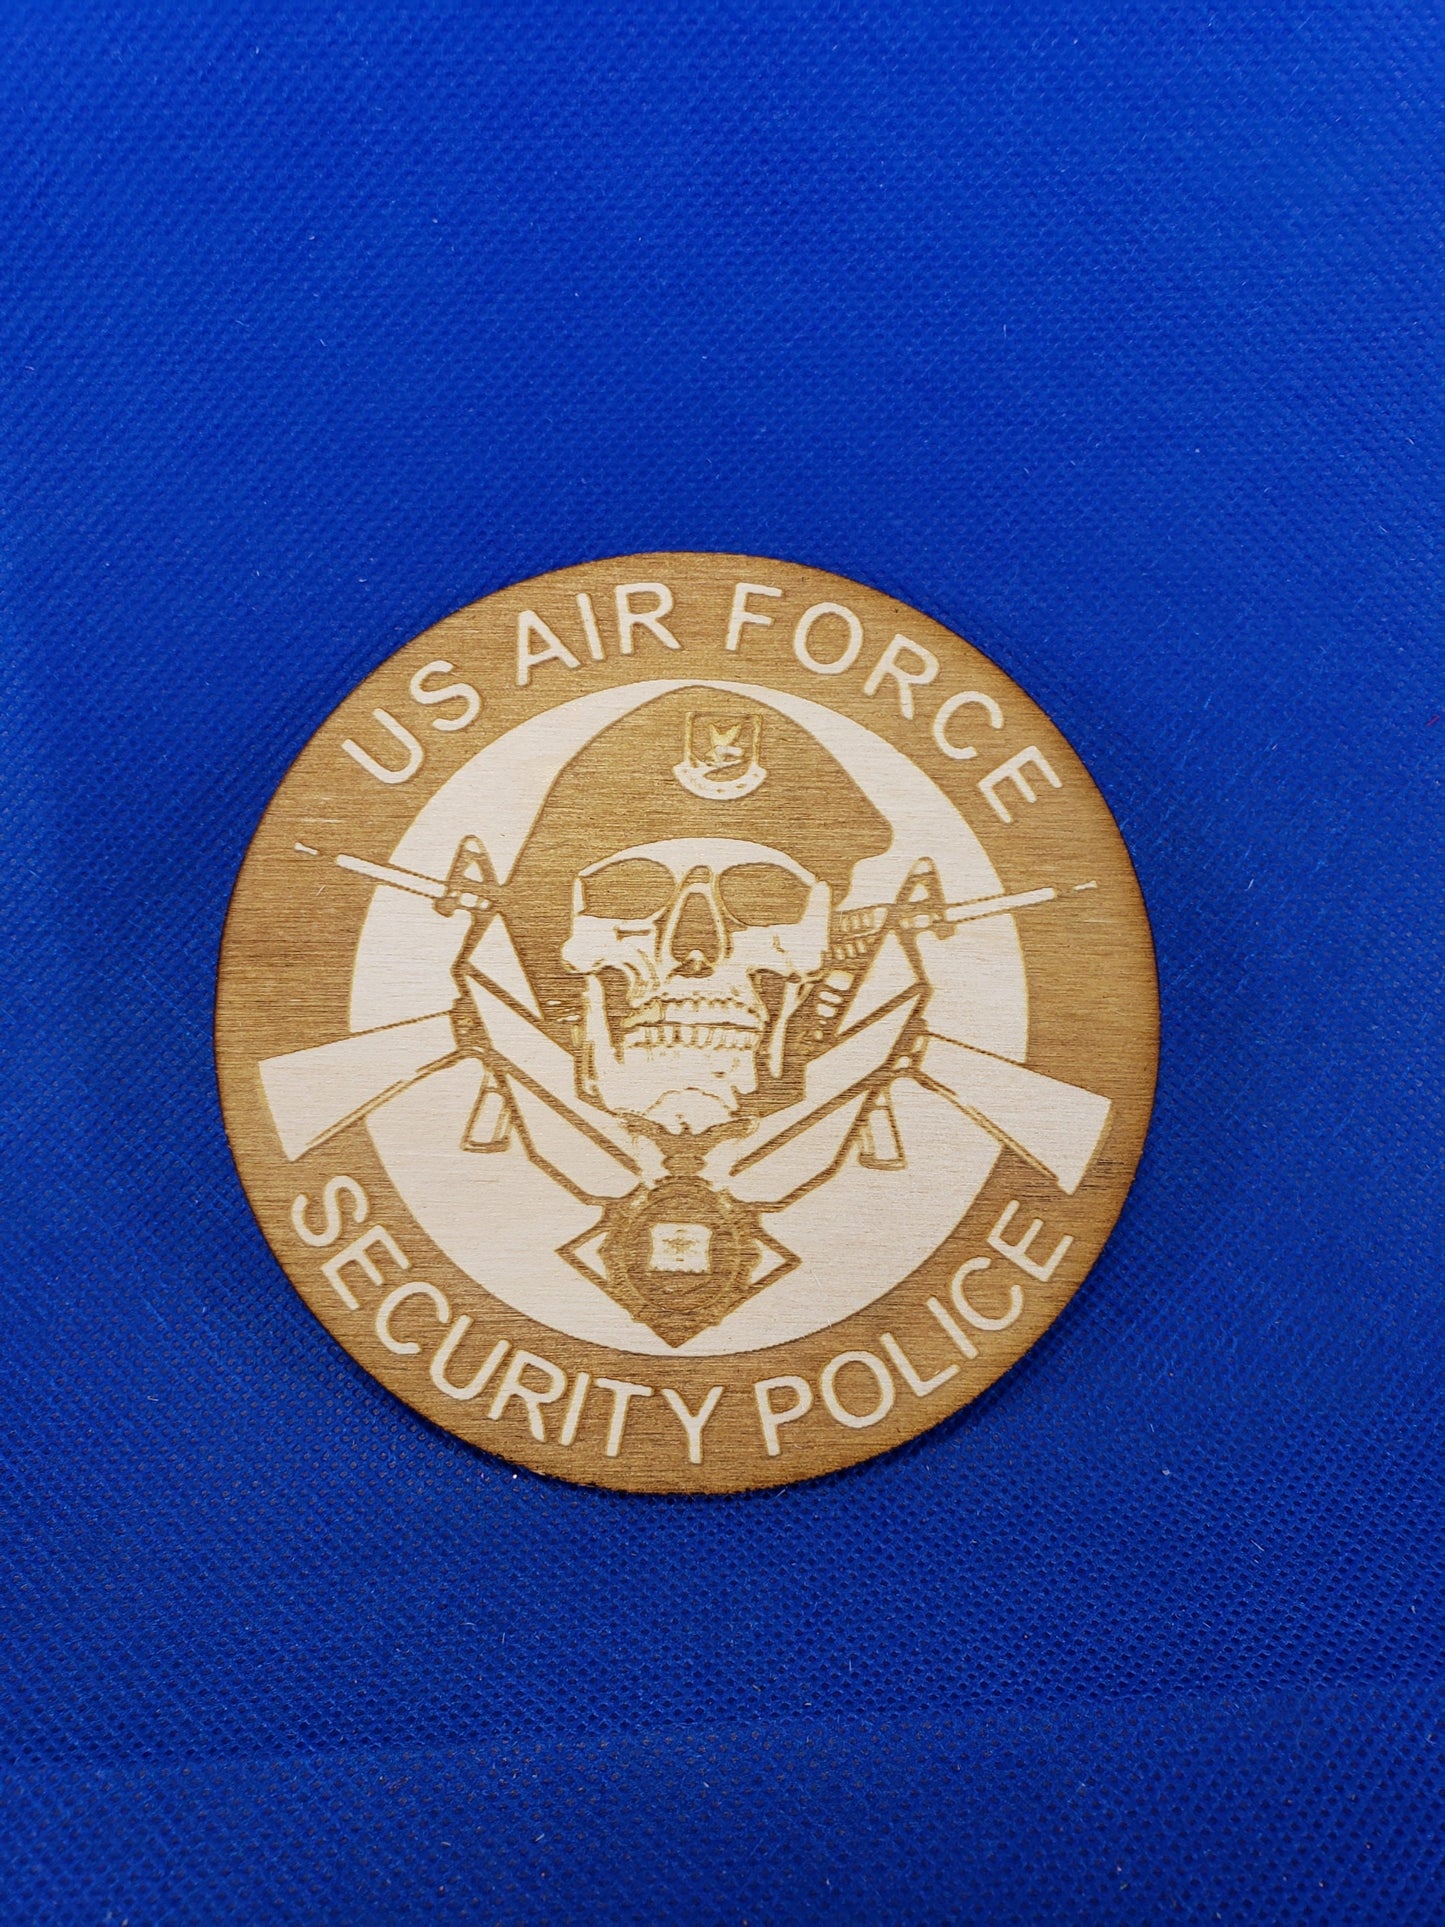 US Air Force Security Police - Laser cut natural wooden blanks